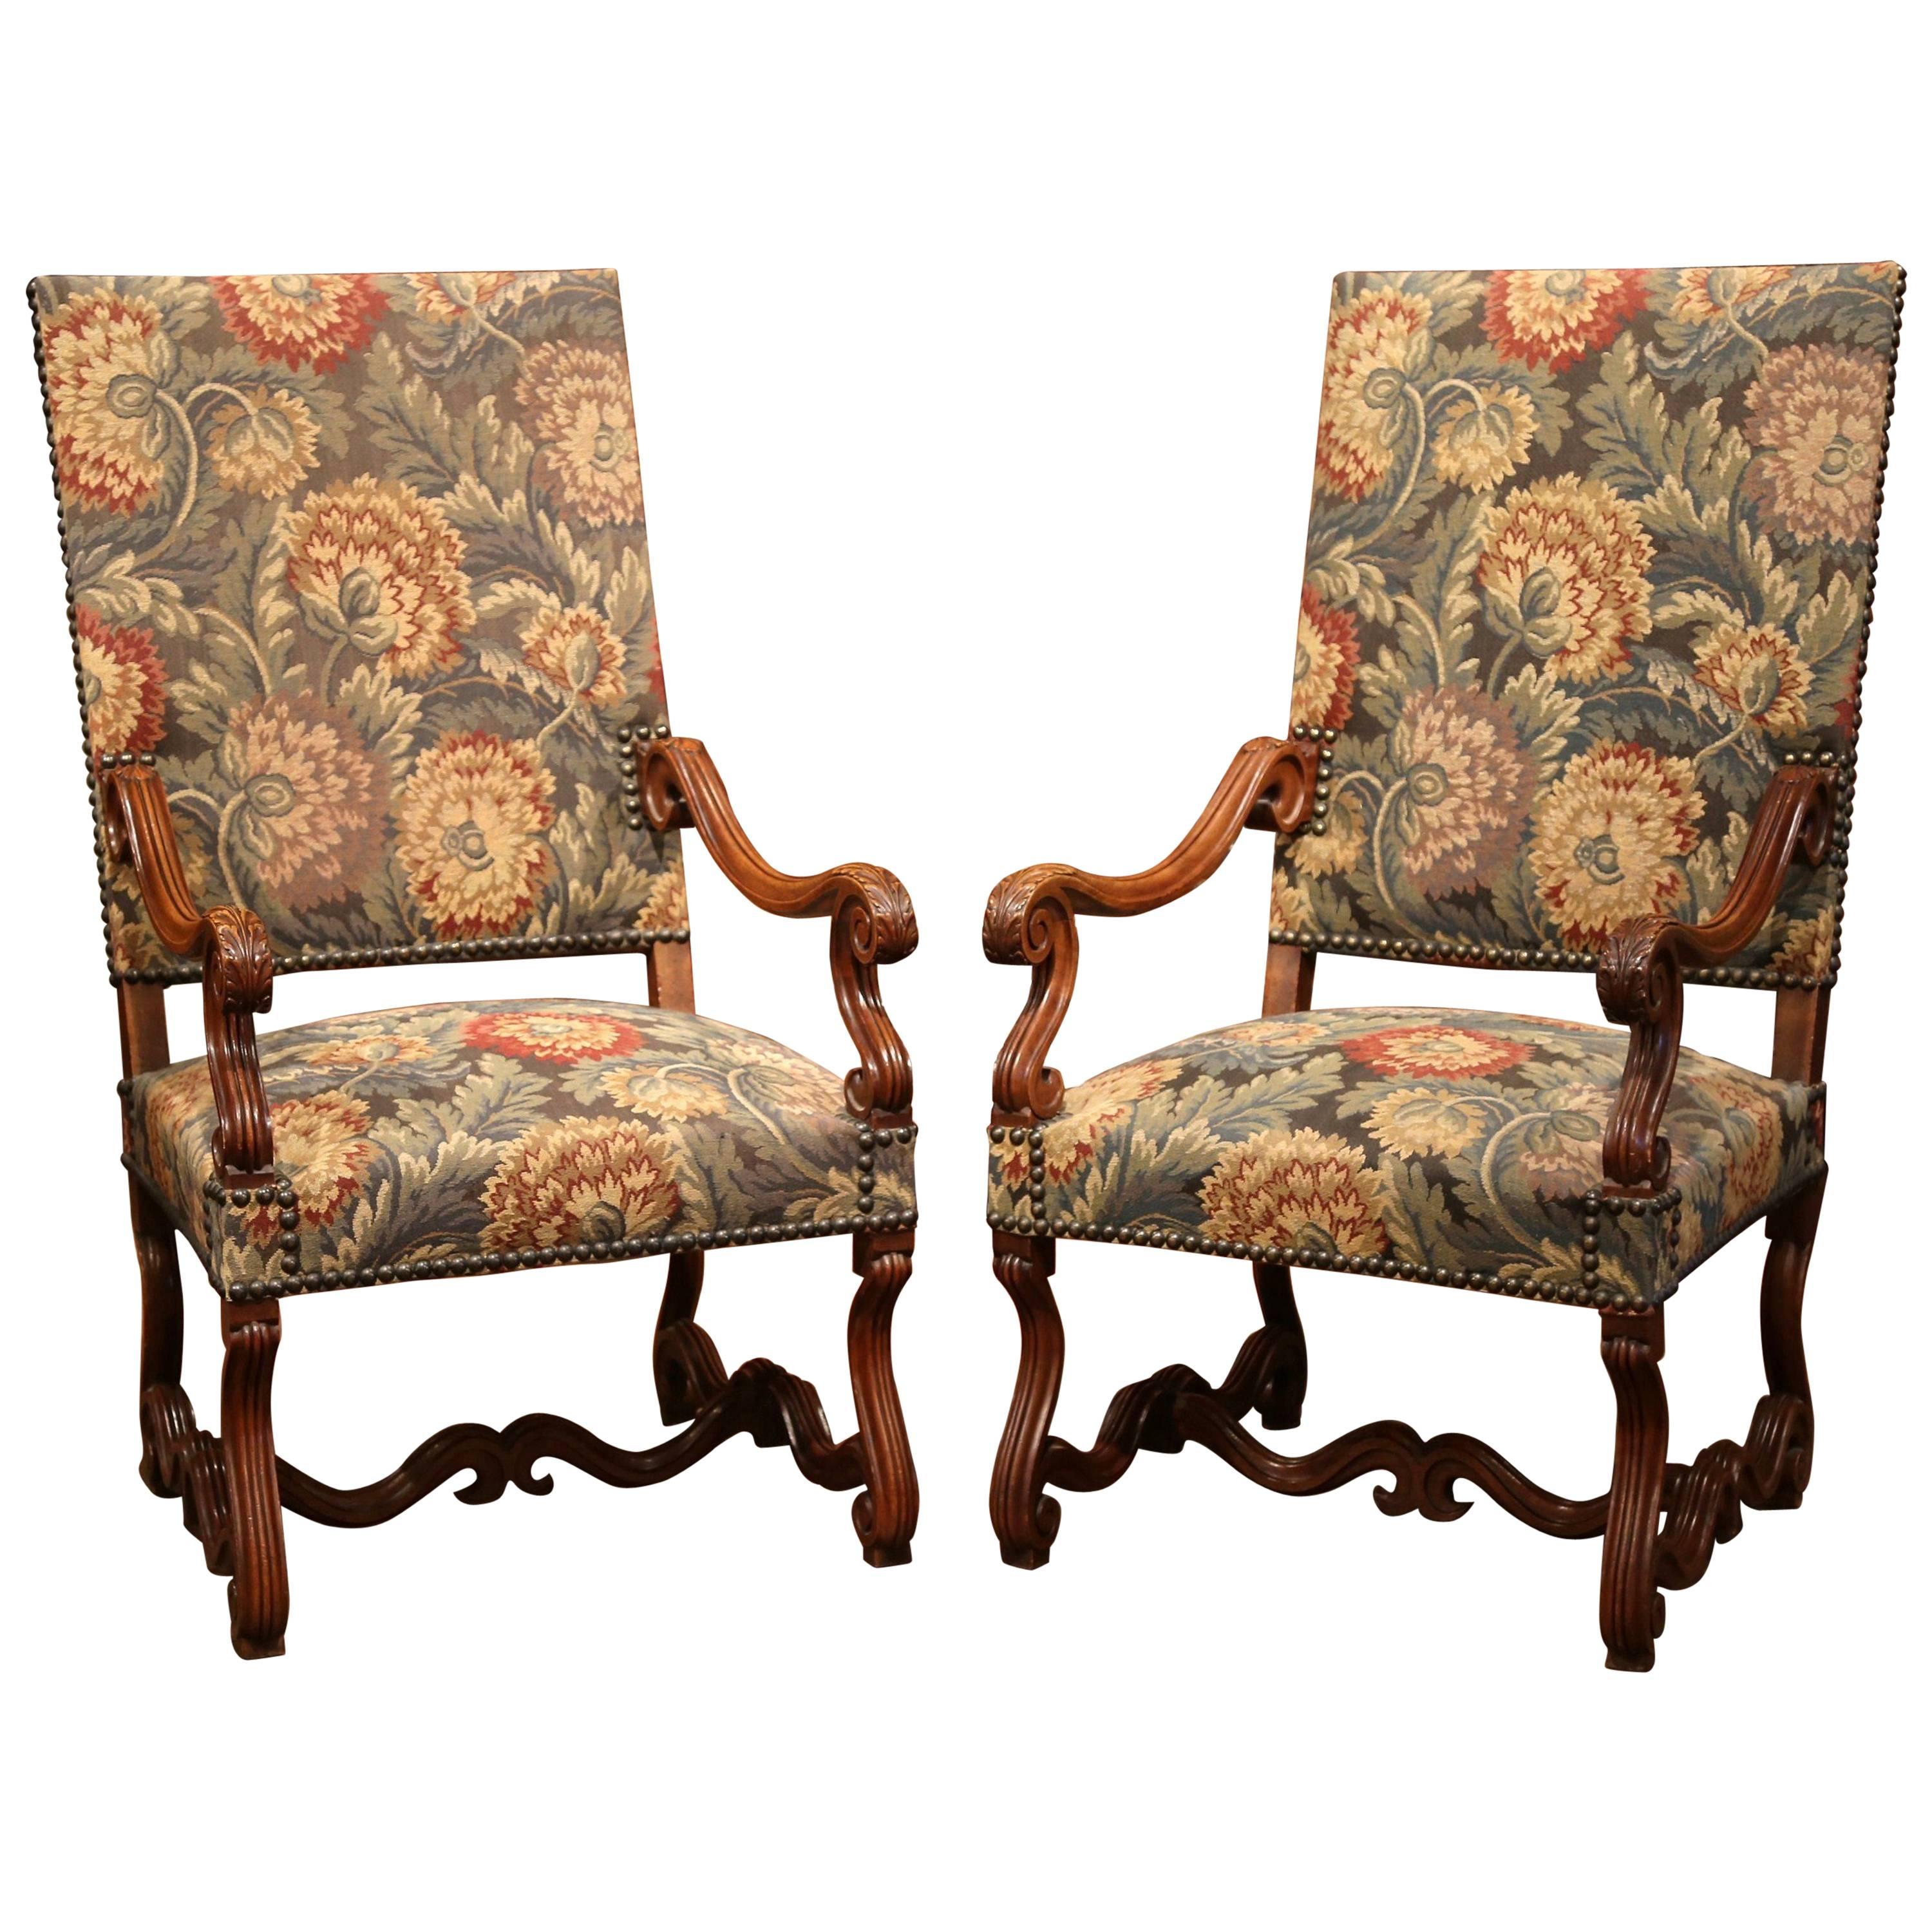 Tall Pair of 19th Century French Louis XIII Carved Walnut Upholstered Armchairs